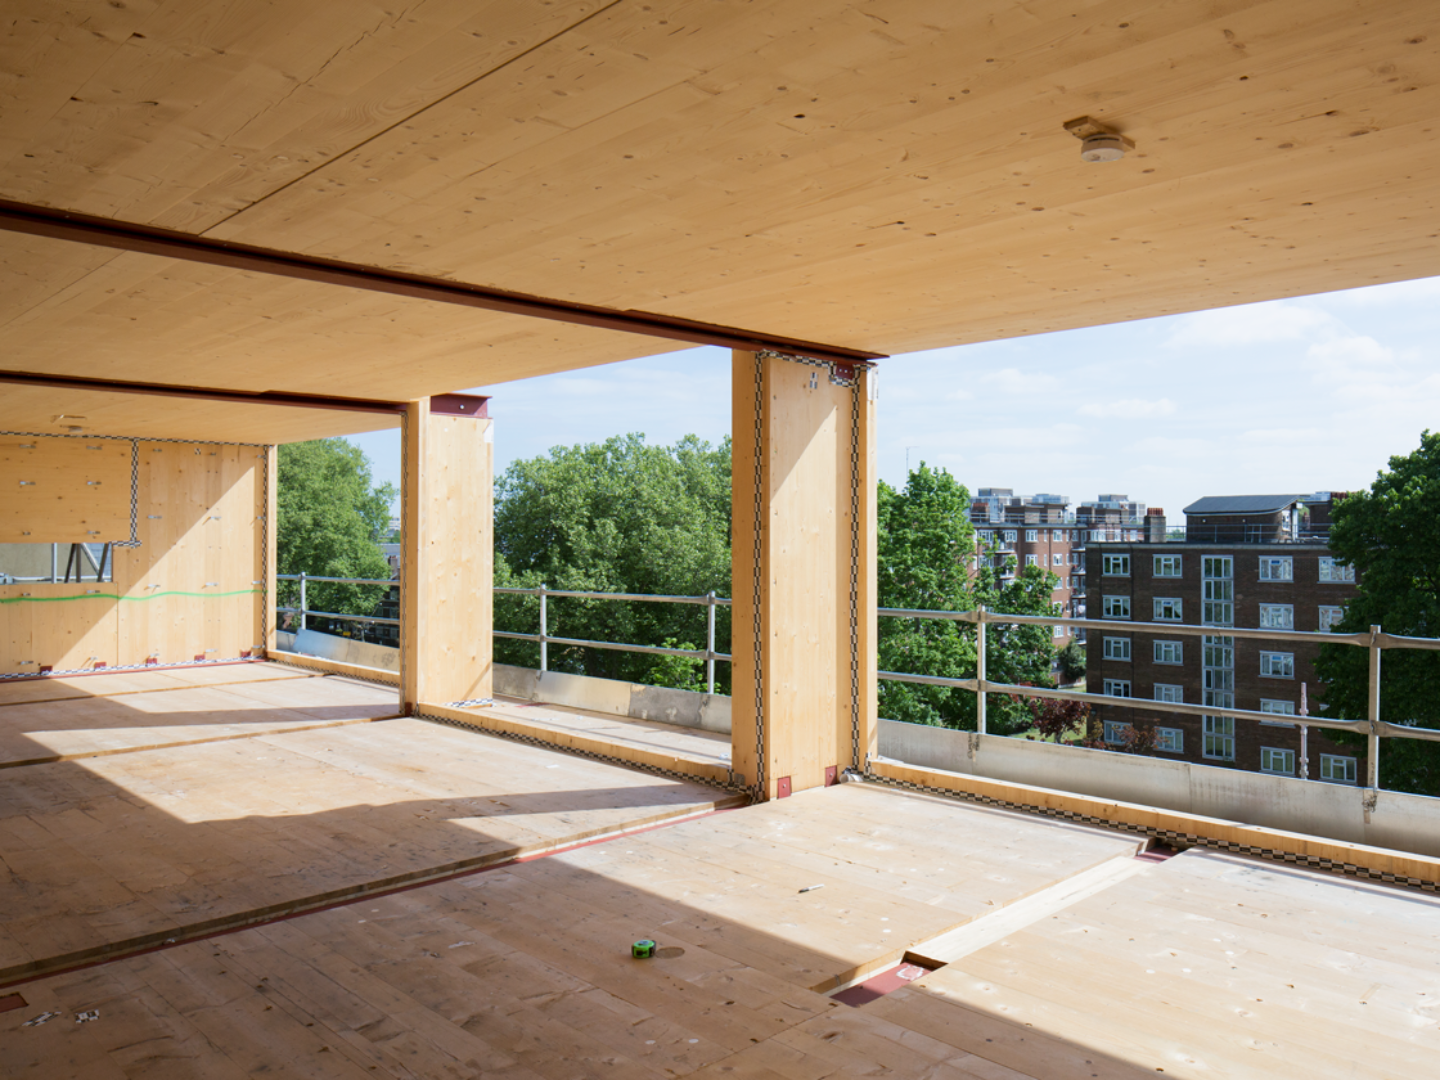 Building with timber: Hoxton Cinema